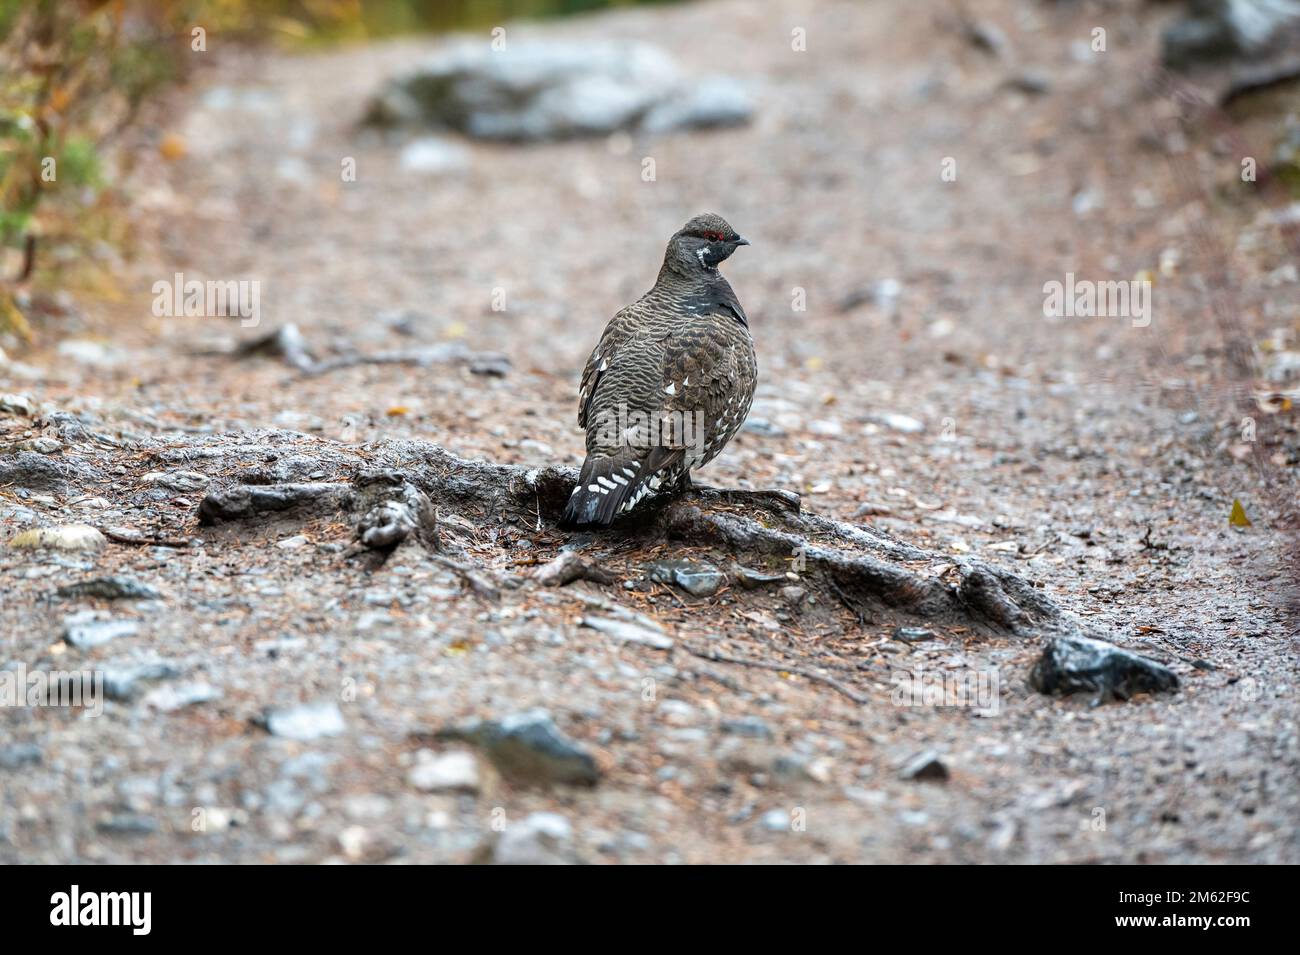 Spruce grouse (Falcipennis canadensis), Emerald Lake, British Columbia, Canada Stock Photo